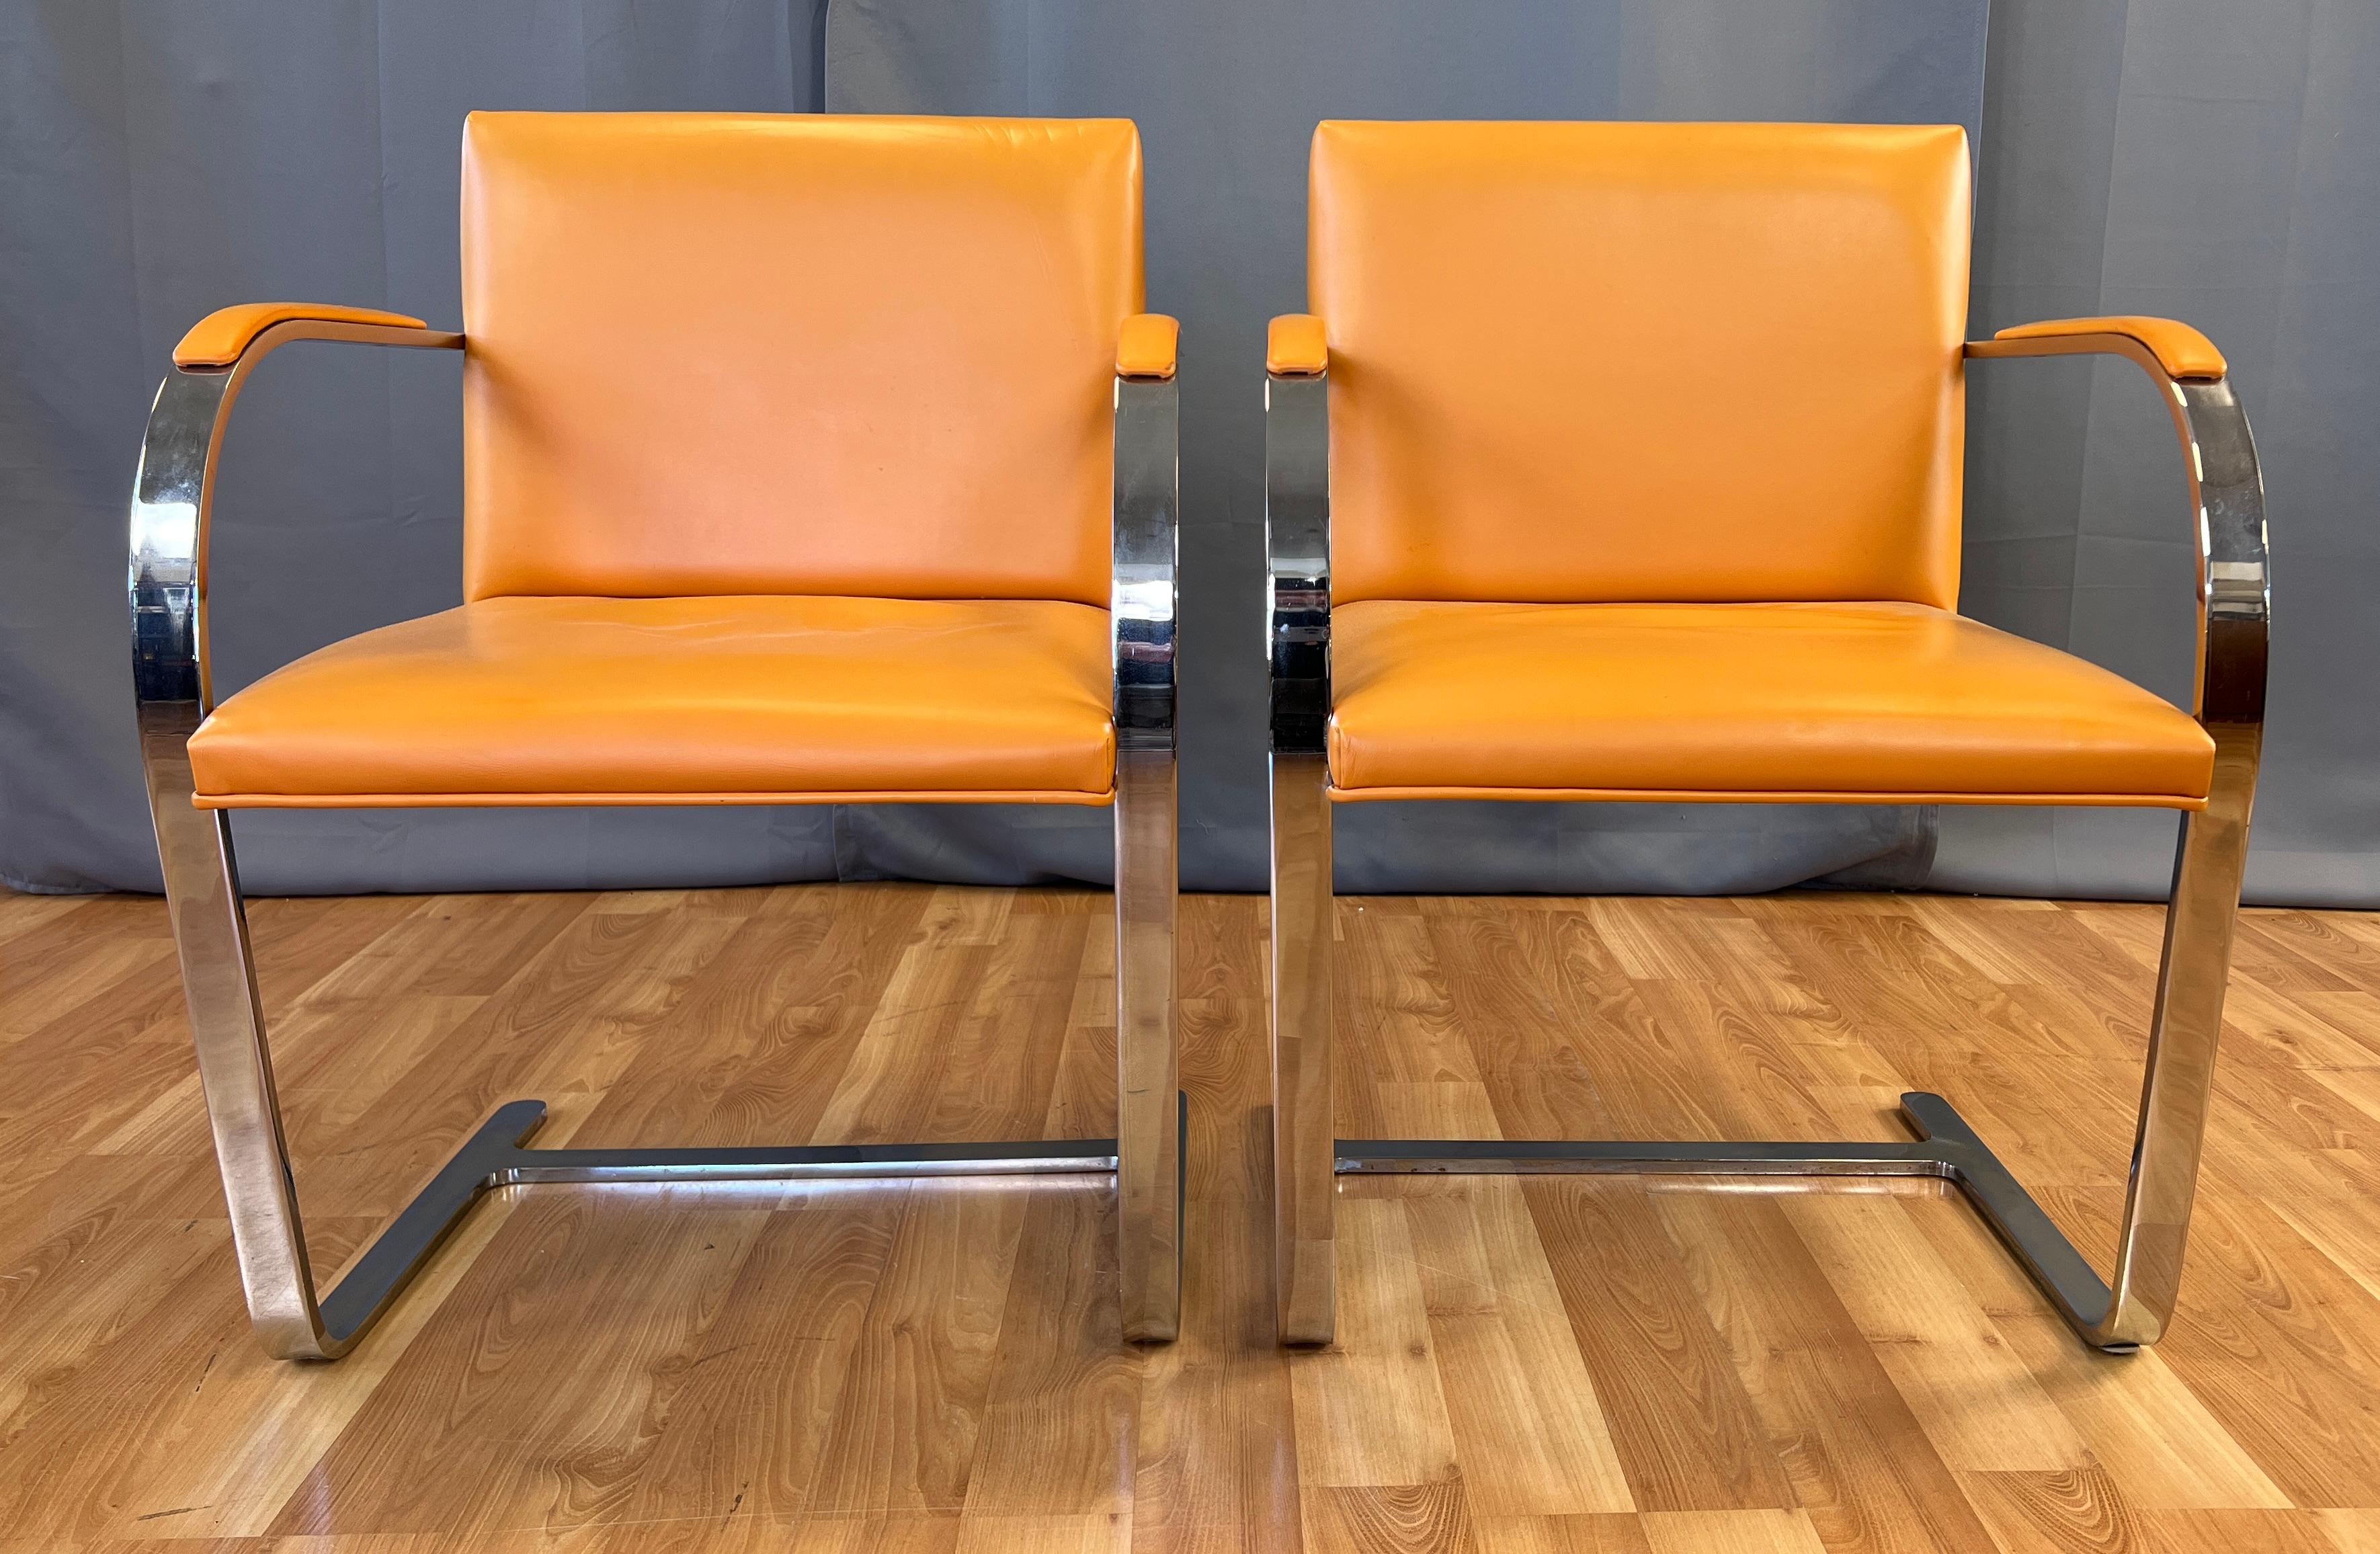 Two wonderful circa 1970s flat bar Brno armchairs in orange leather, designed by Mies Van der Rohe. 
Made by Gordon International, in the country of Argentina. 
The chairs are a Classic design, with a great splash of color with their orange